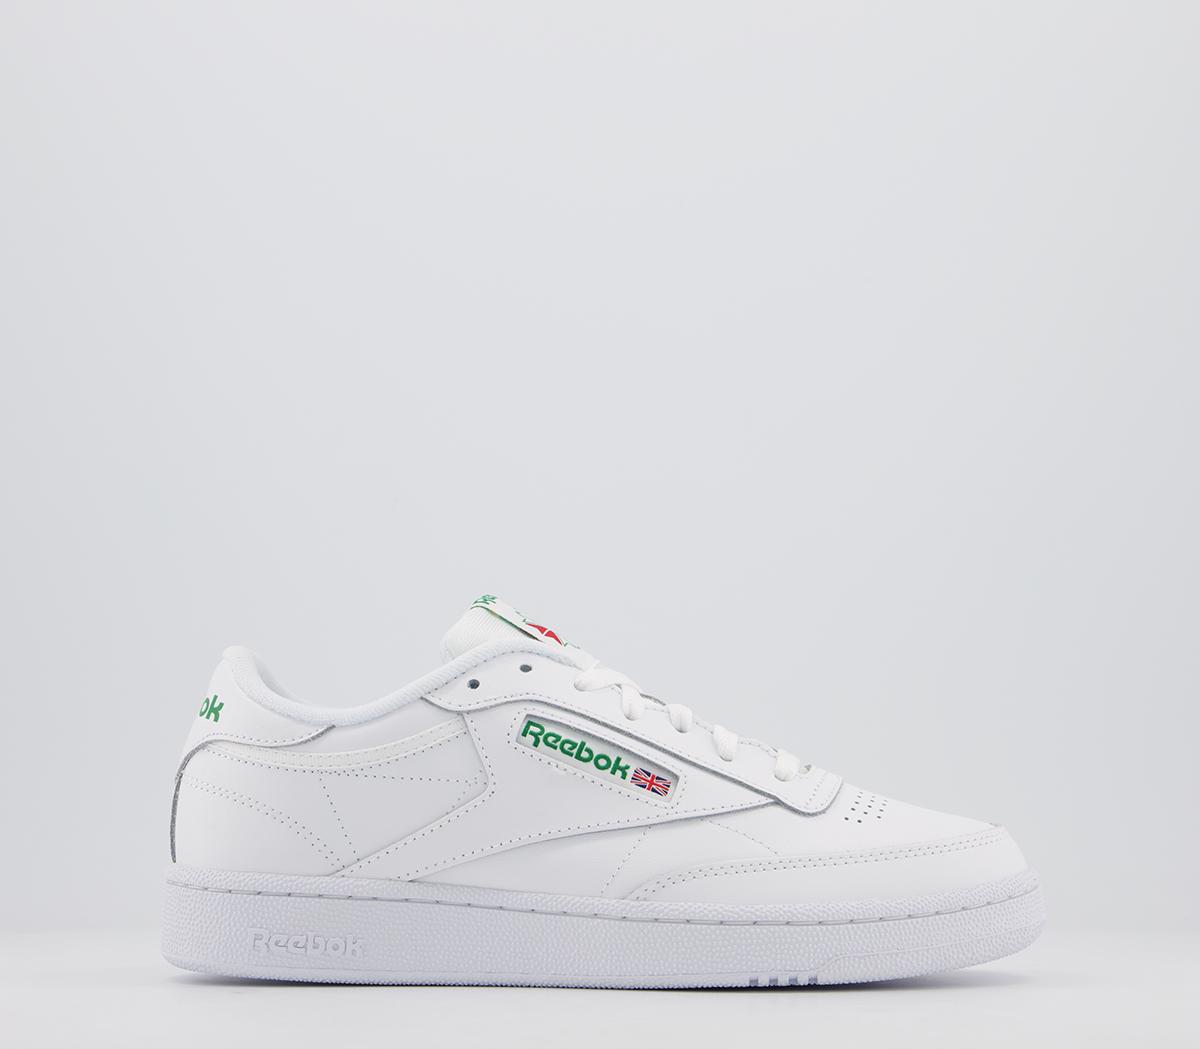 imod celle fryser Reebok Club C 85 Trainers White Green - Women's Classic Trainers